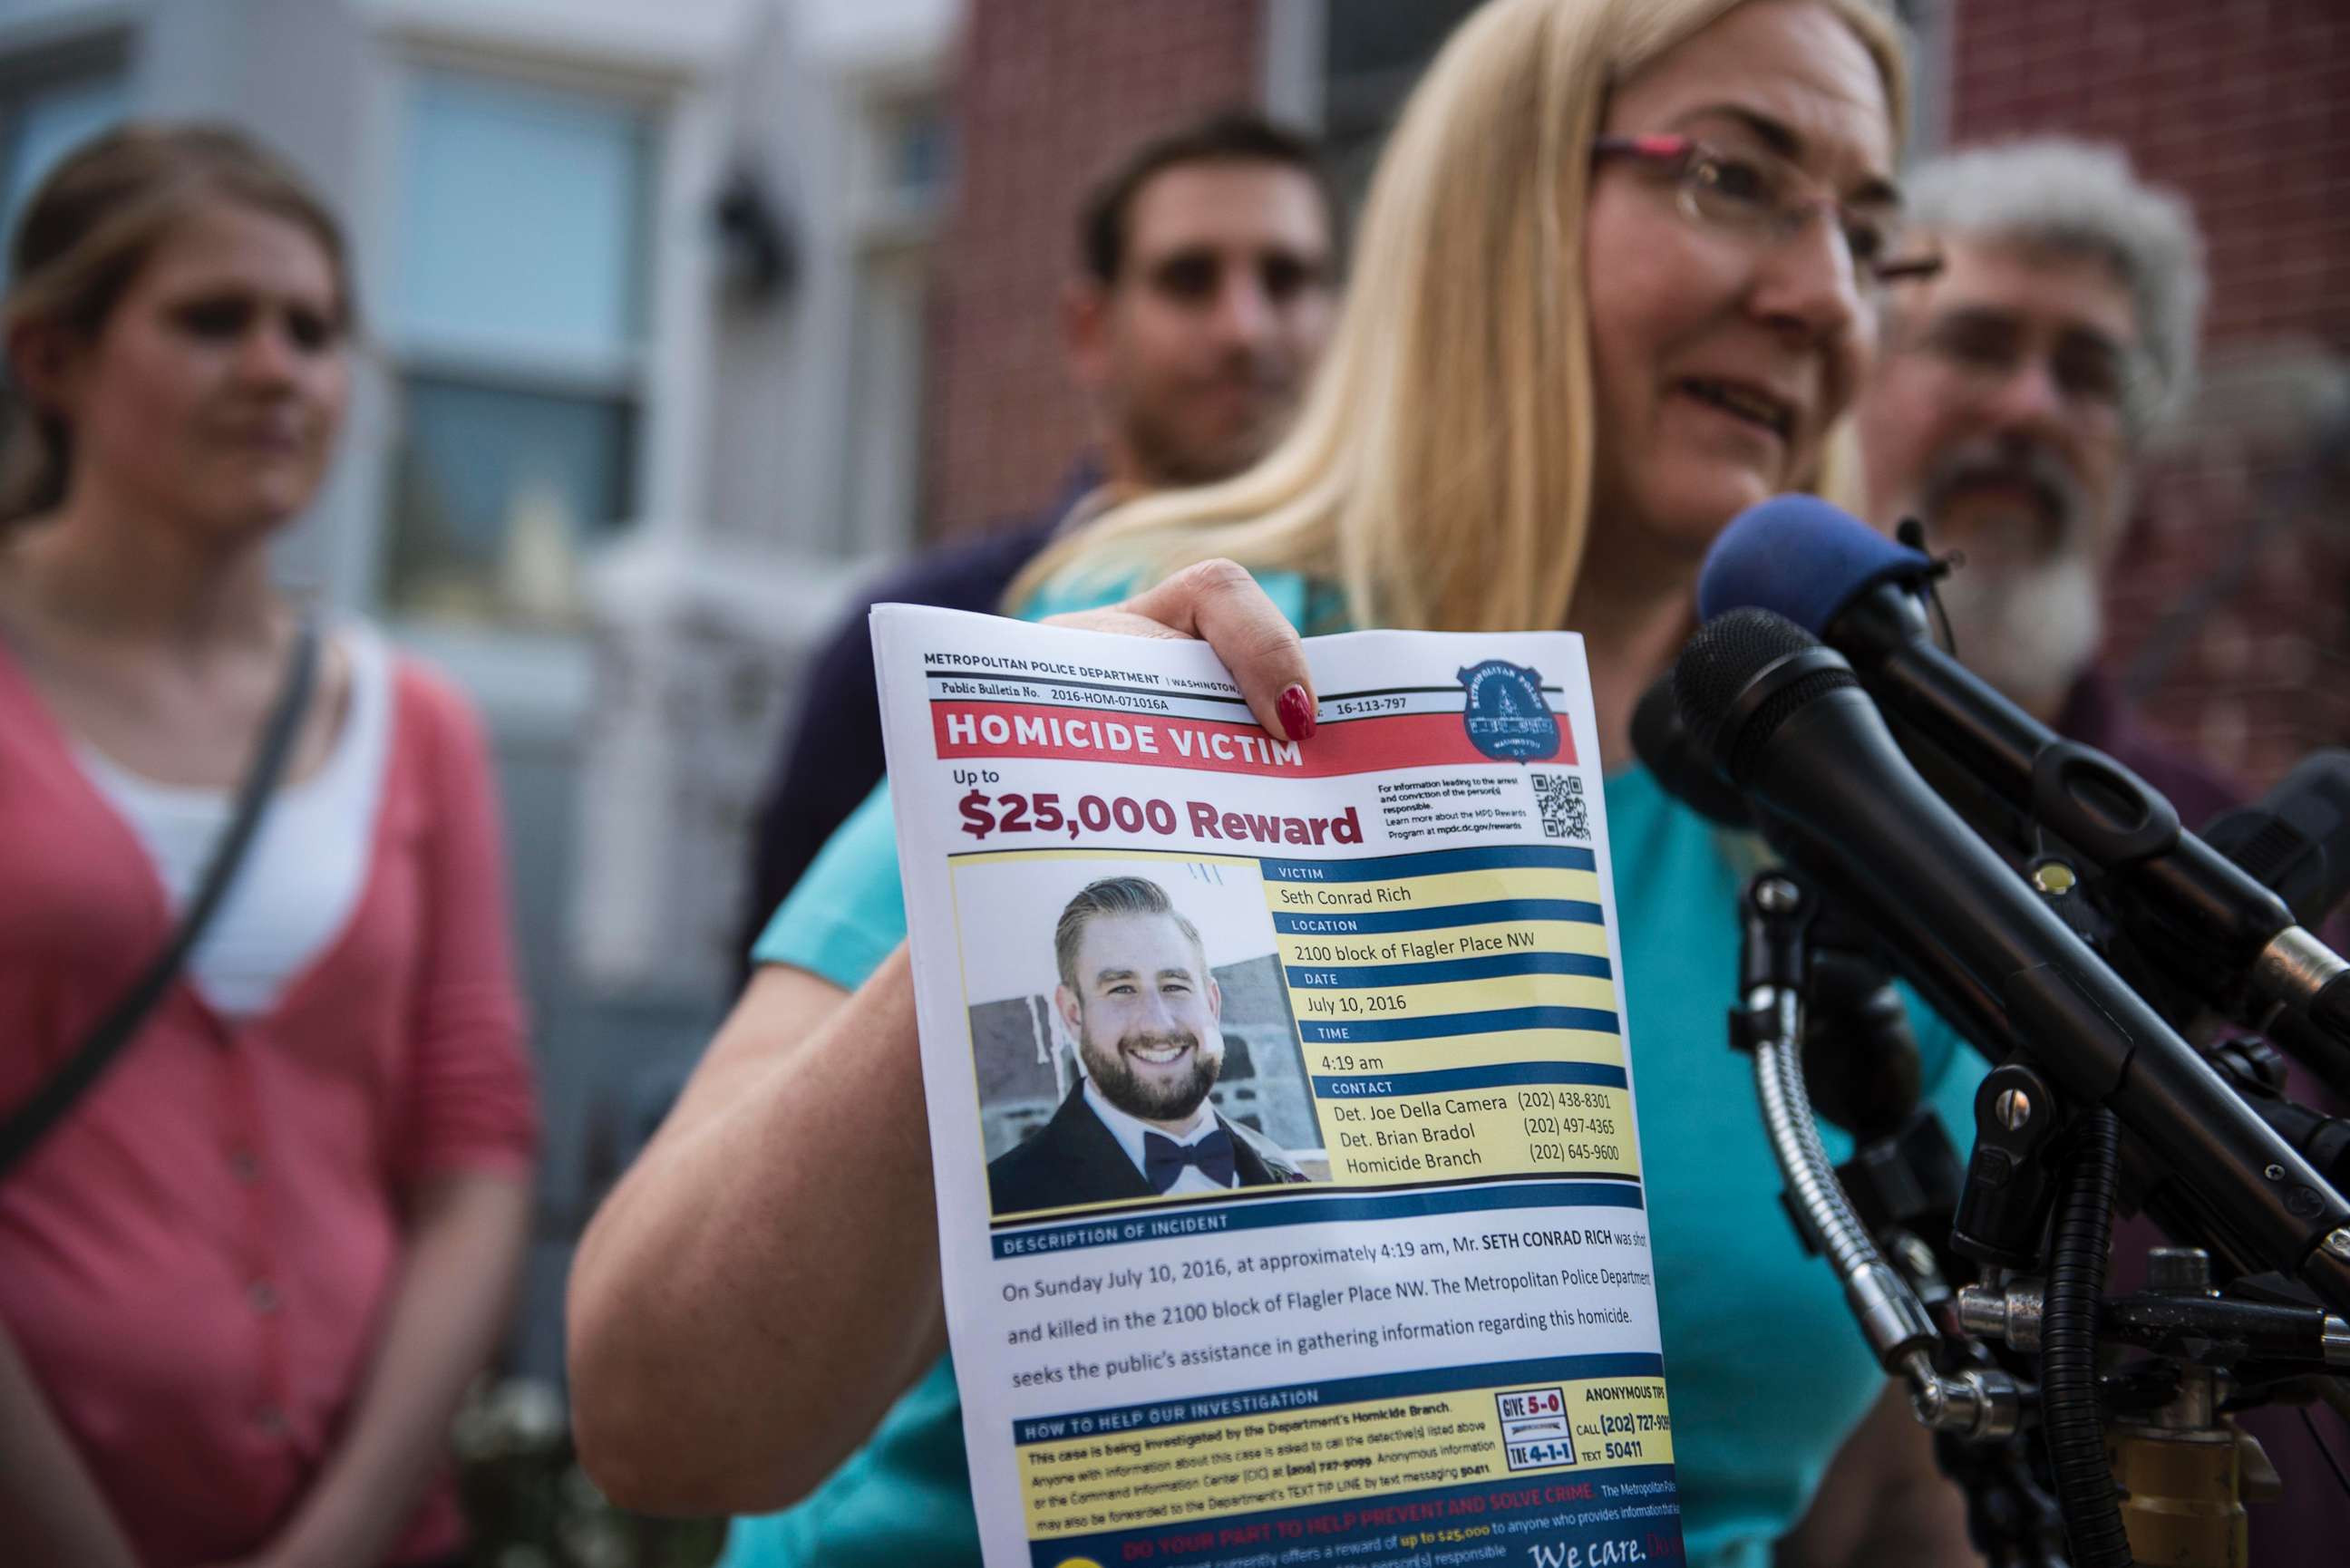 PHOTO: Mary Rich, the mother of slain DNC staffer Seth Rich, gives a press conference in Bloomingdale, Washington D.C., on Aug. 1, 2016.  